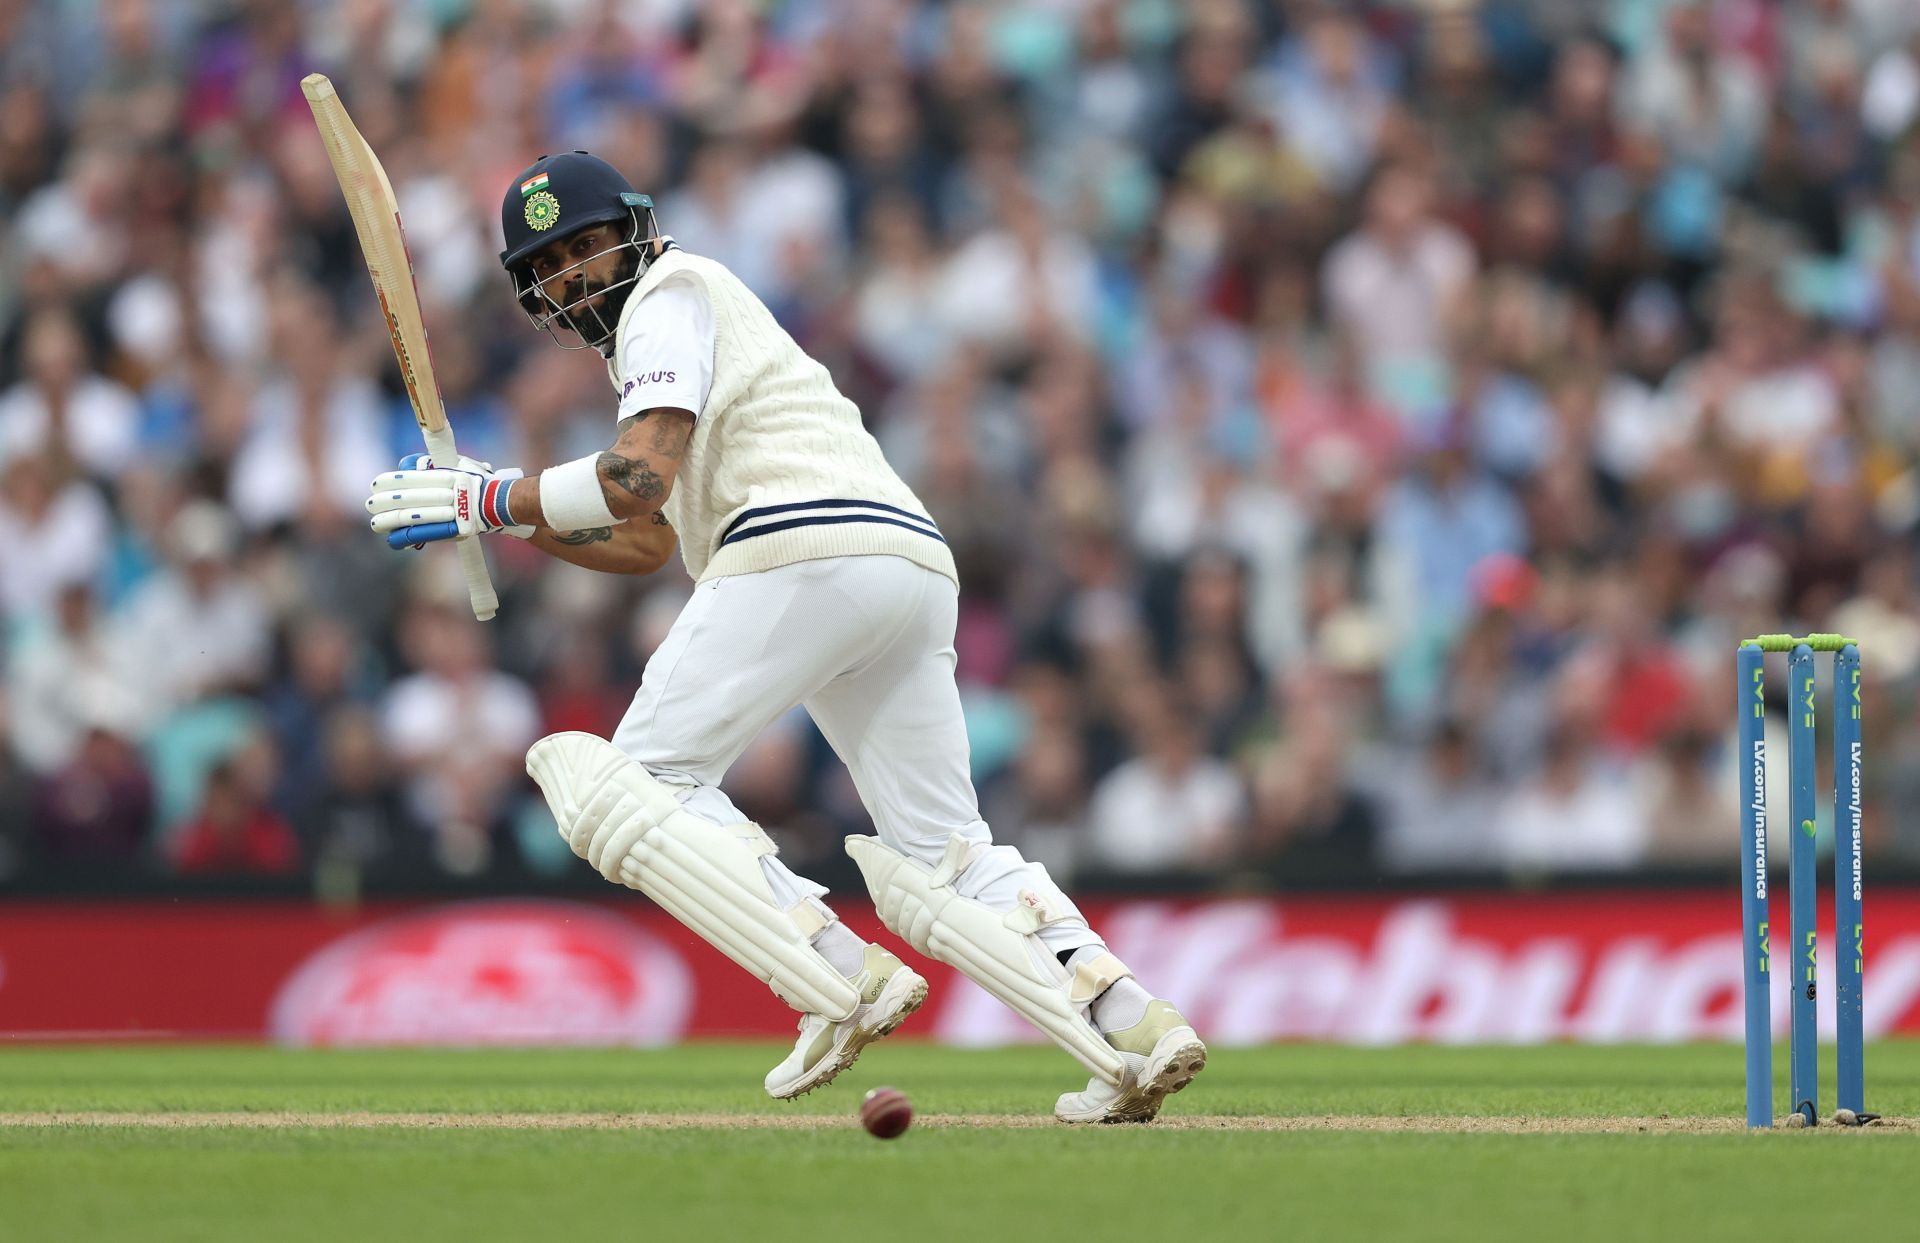 Virat Kohli has not looked out of sorts in the middle